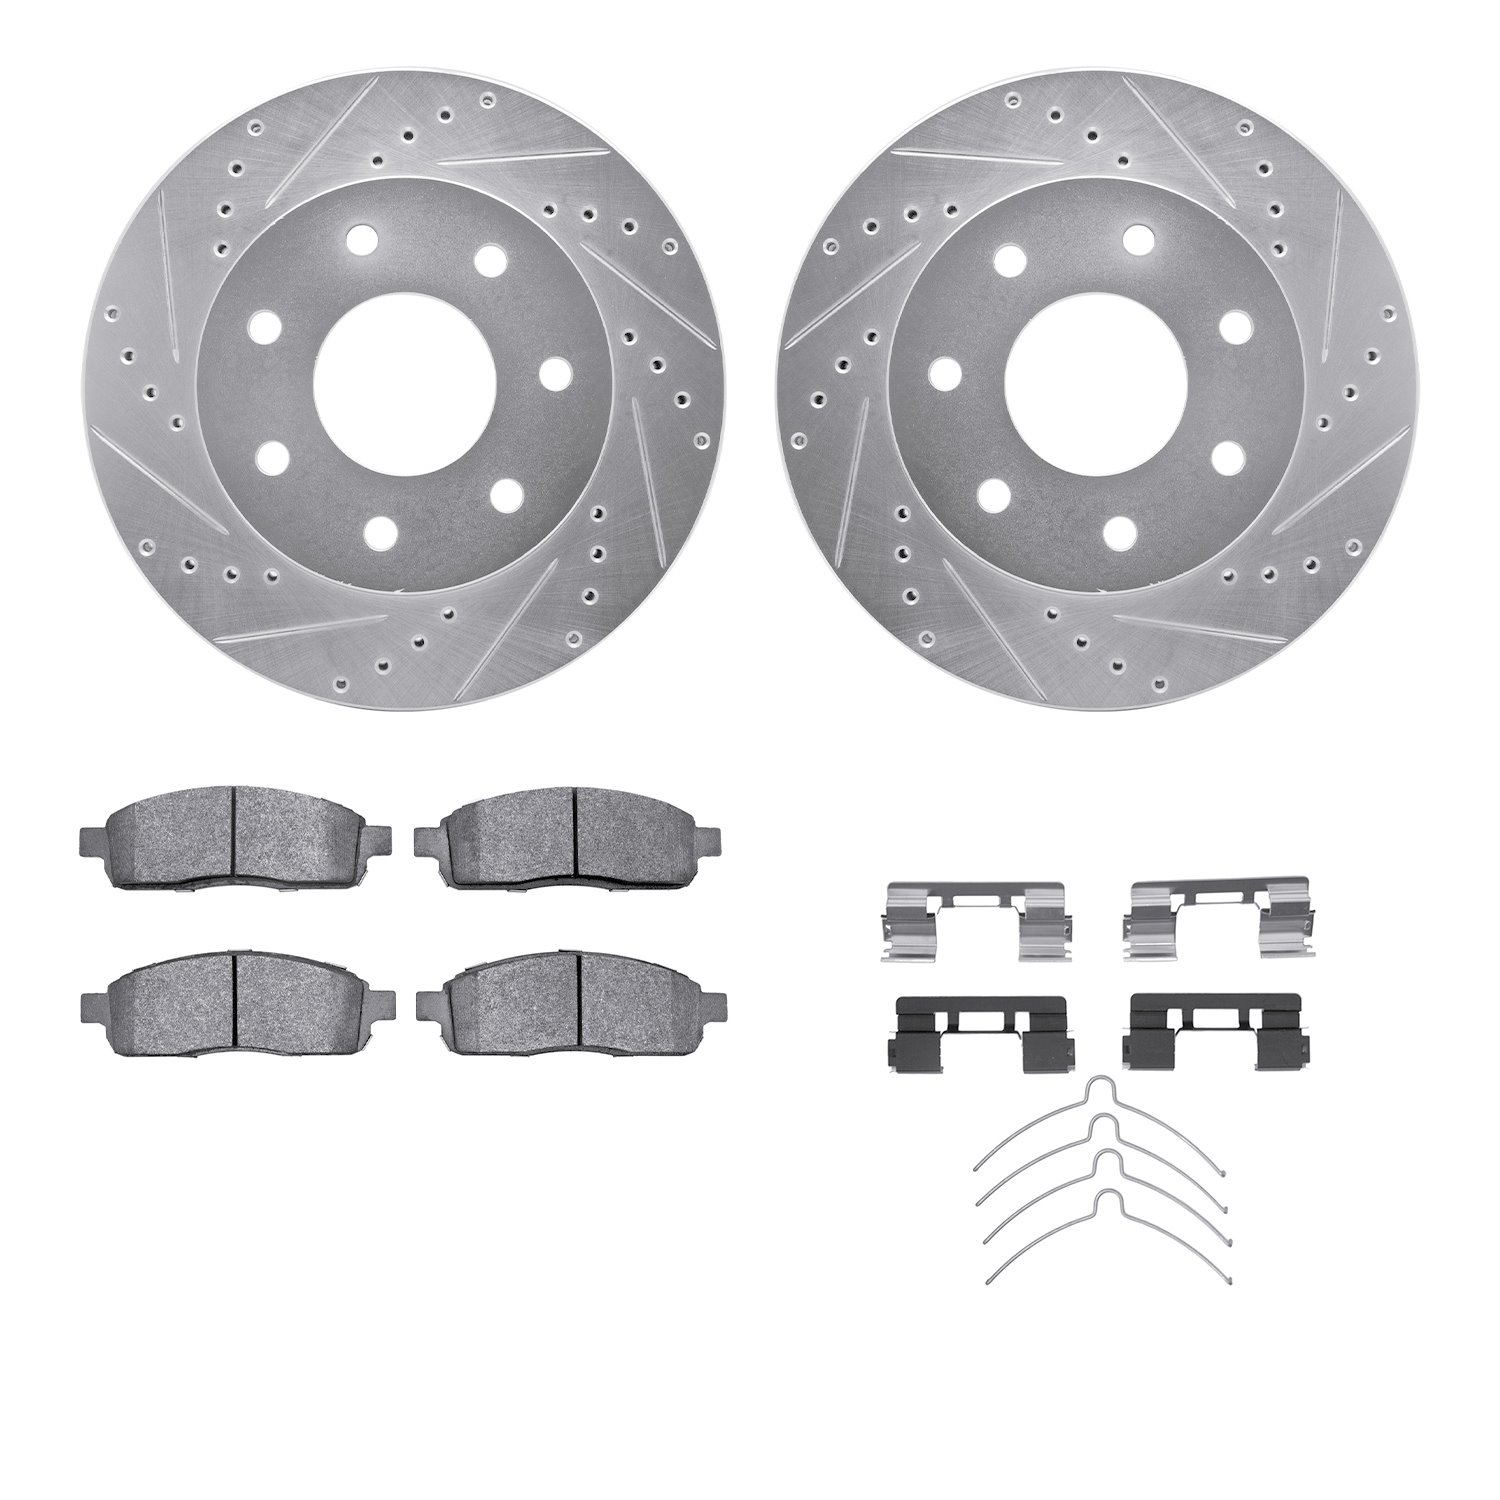 7412-54074 Drilled/Slotted Brake Rotors with Ultimate-Duty Brake Pads Kit & Hardware [Silver], 2004-2008 Ford/Lincoln/Mercury/Ma